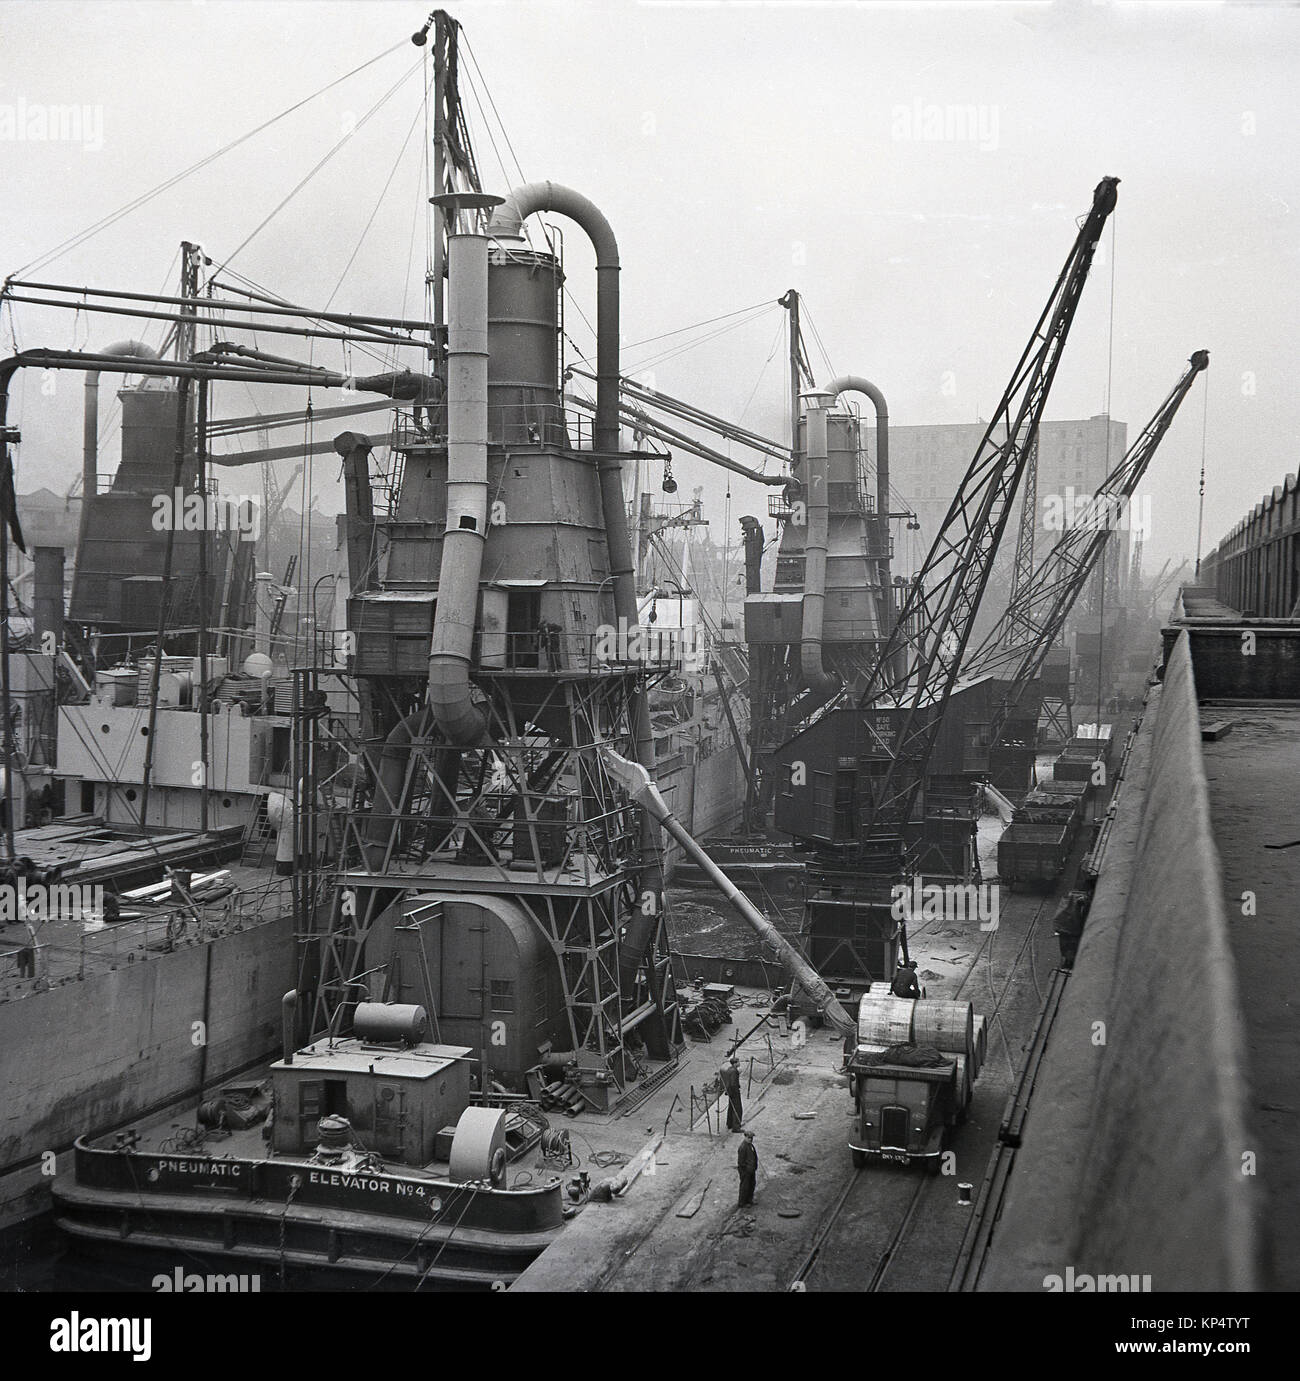 1950s, historical picture showing workers and activity with ships and floating pneumatic elevators in dock 9, the King George V Dock ( KGV) the last of the docks to be built and a dock which was able to acomodate large ships, Port of London, England, UK. Stock Photo